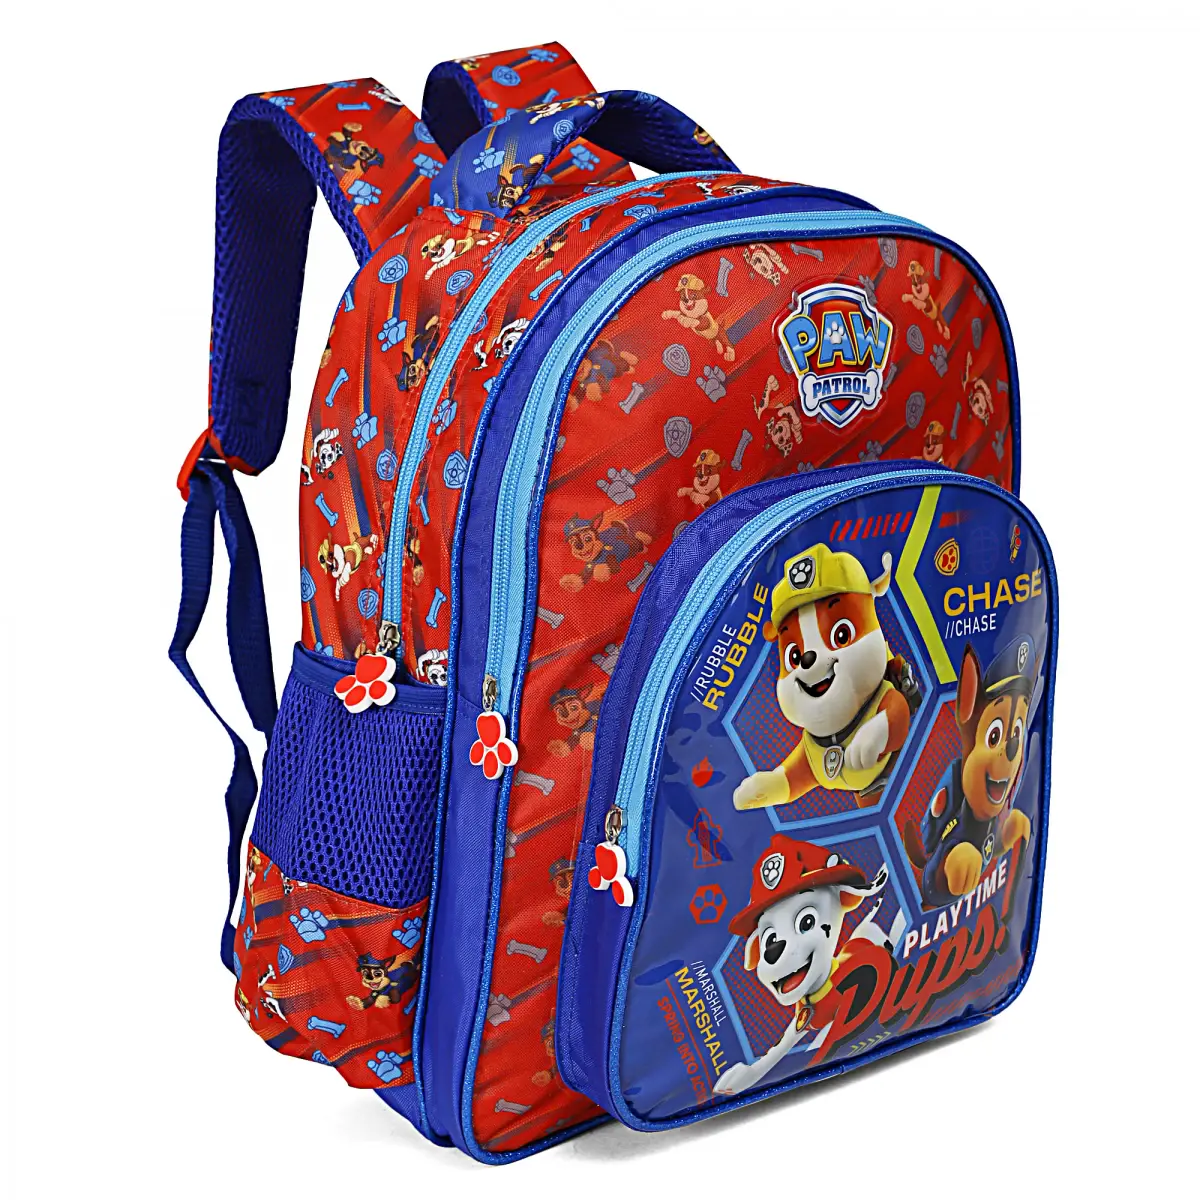 Paw Patrol Pups Bag Pack, 14Inches, Multicolour